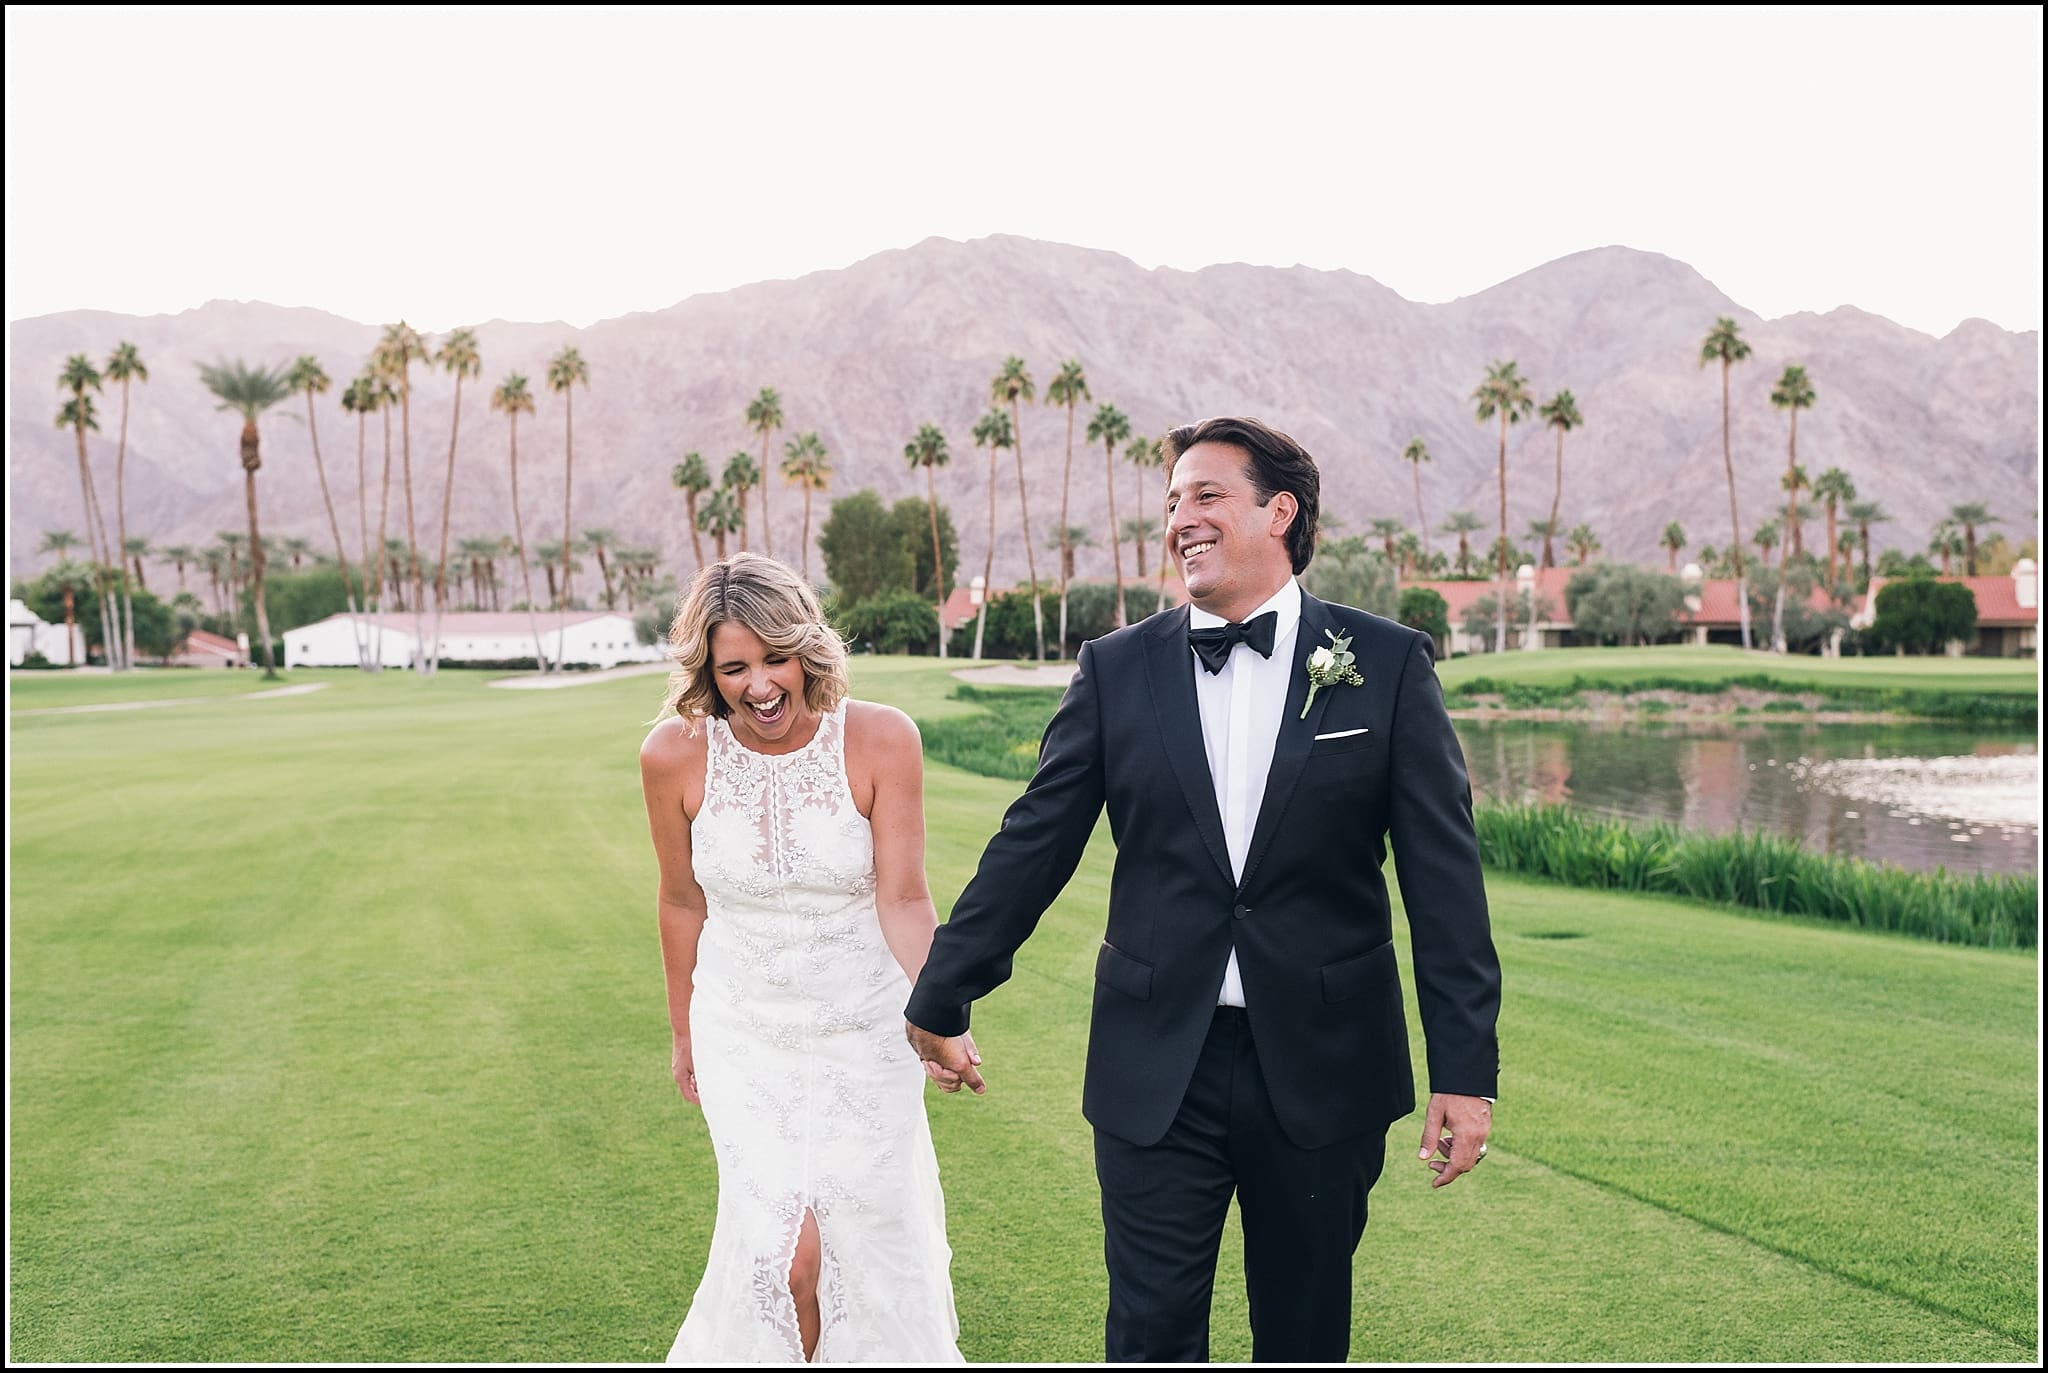  favorite wedding images 2016, wedding photos from 2016, our favorite wedding photos, la quinta country club wedding, la quinta wedding, la quinta wedding photographer